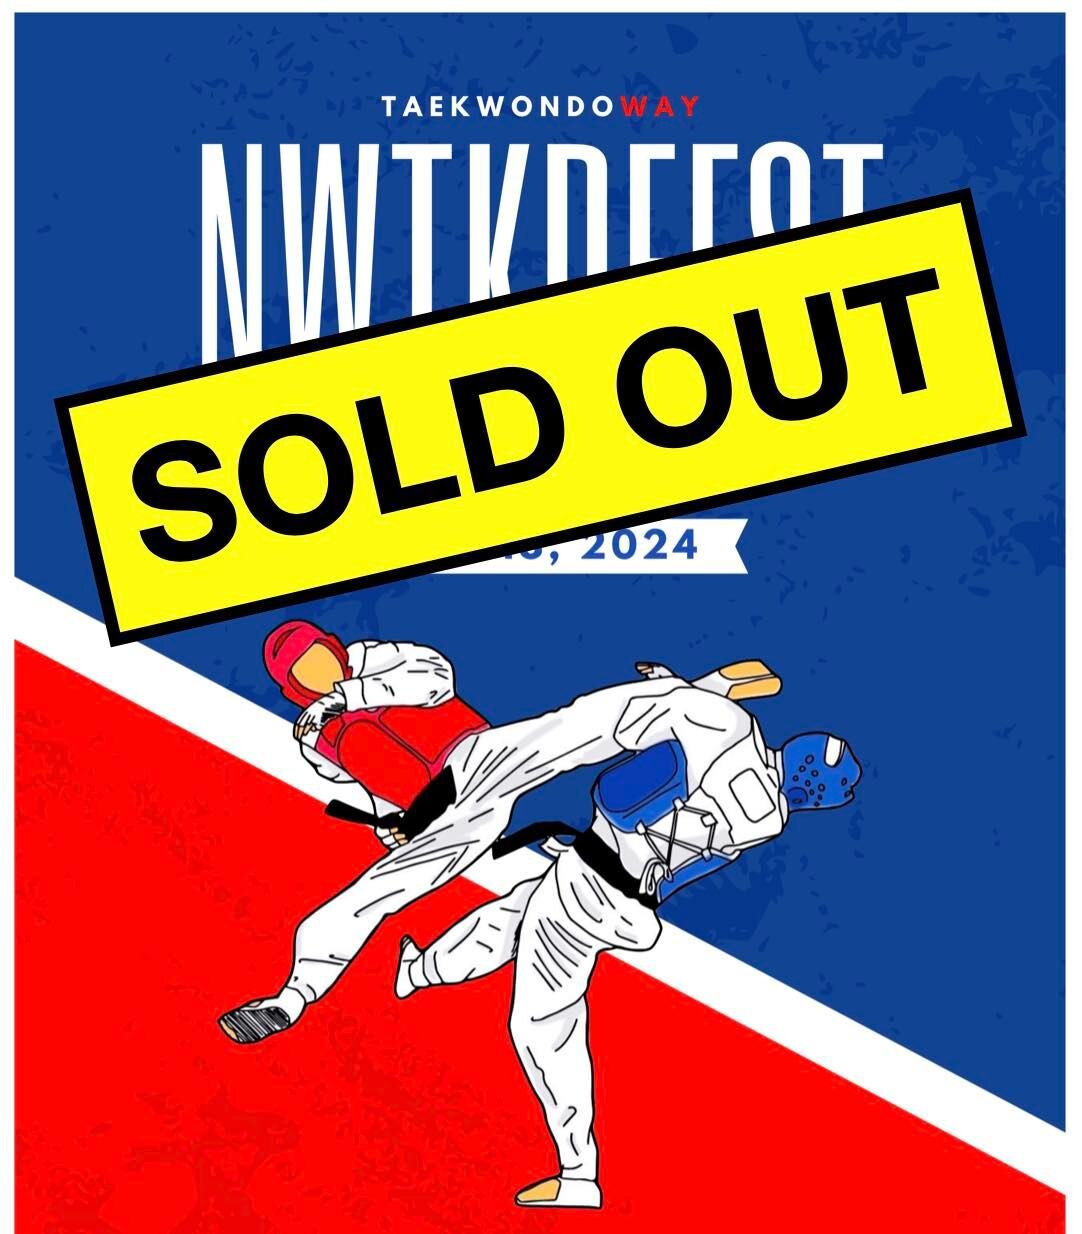 Thank you all for your participation in the NWTKD Festival, we have hit our maximum capacity for individual competitors. Registration remains open for the Team Events: Demo &amp; Tag-in Sparring.